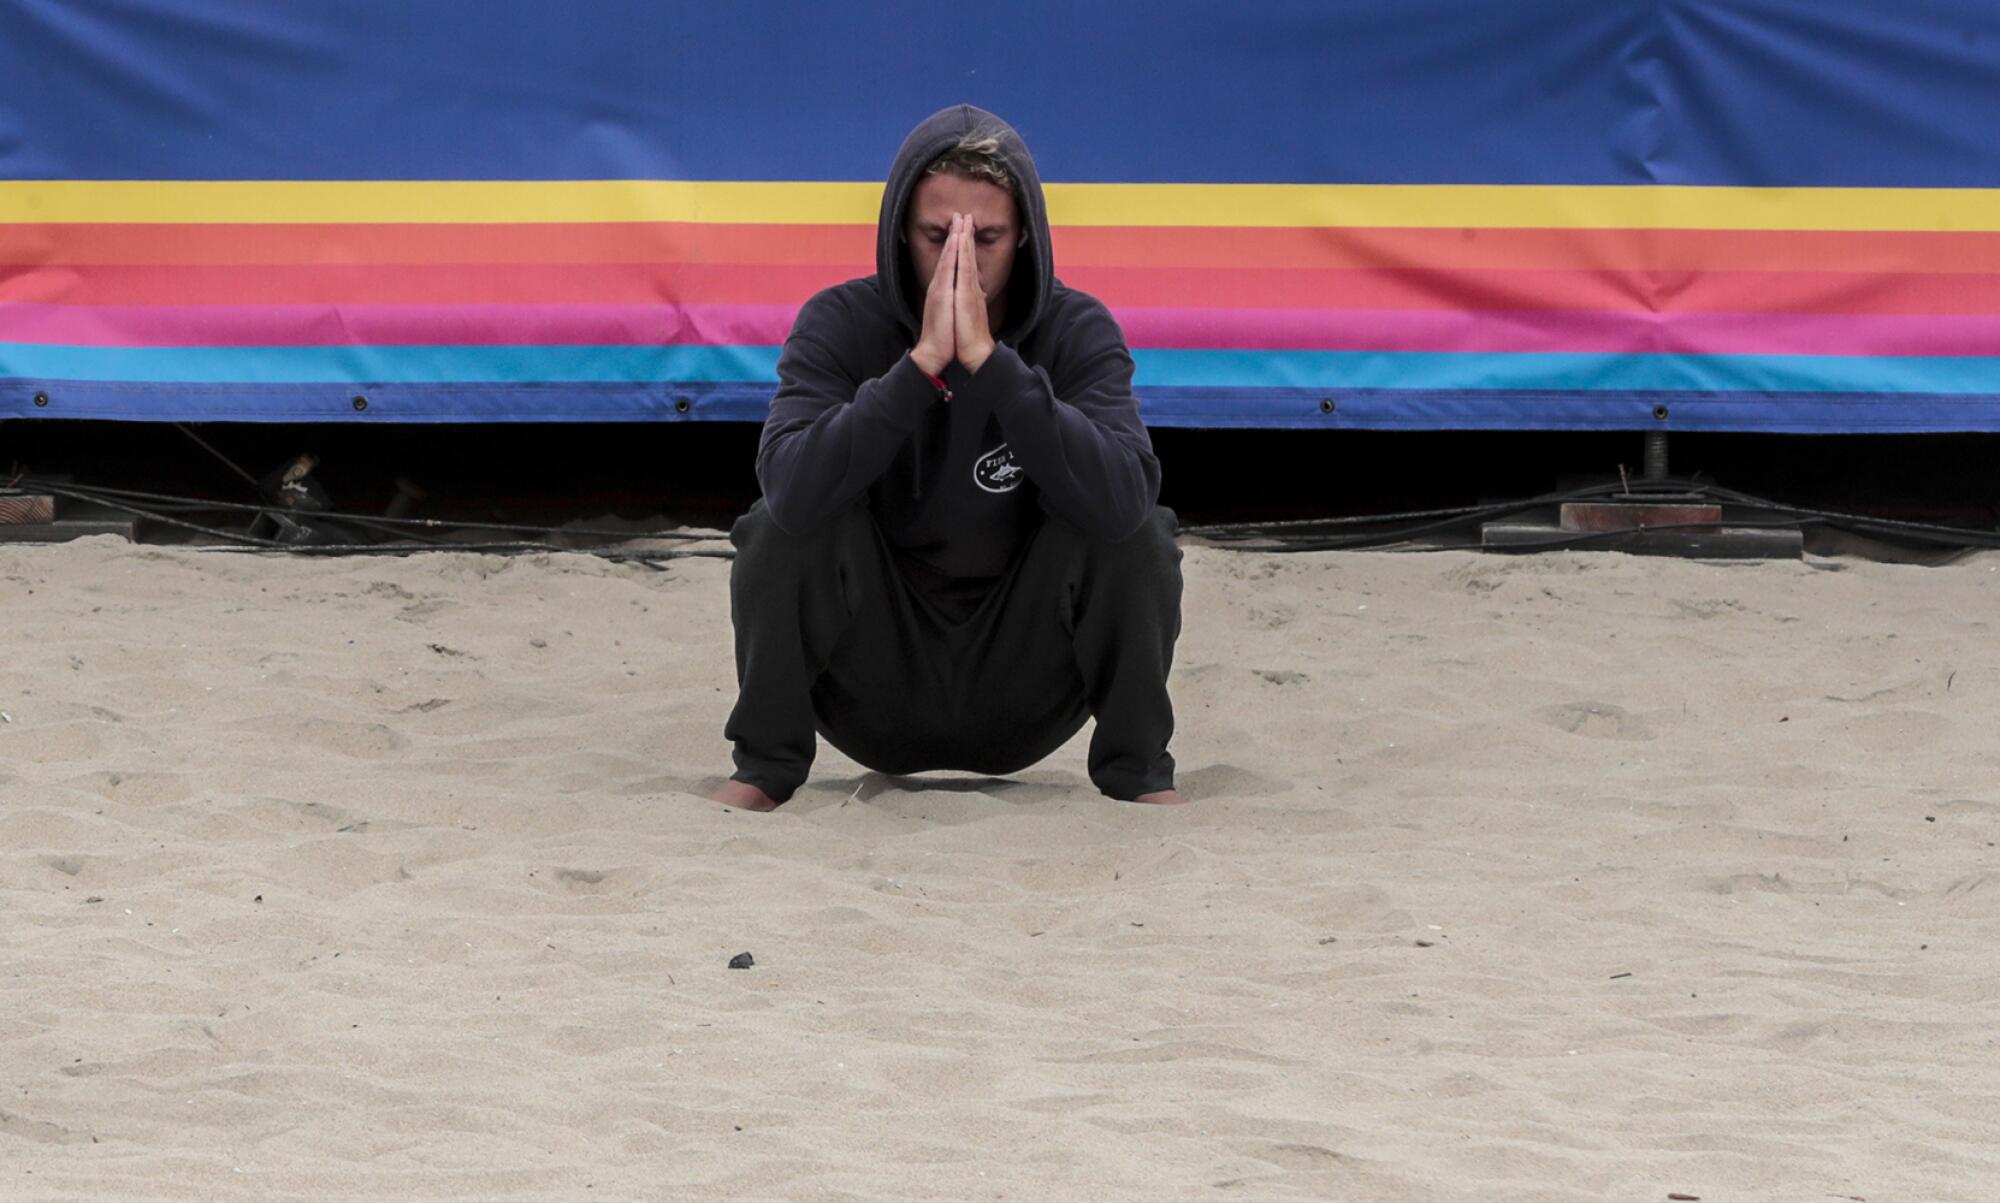 Surfer Jake Marshall stretches and meditates moments before competing in the finals